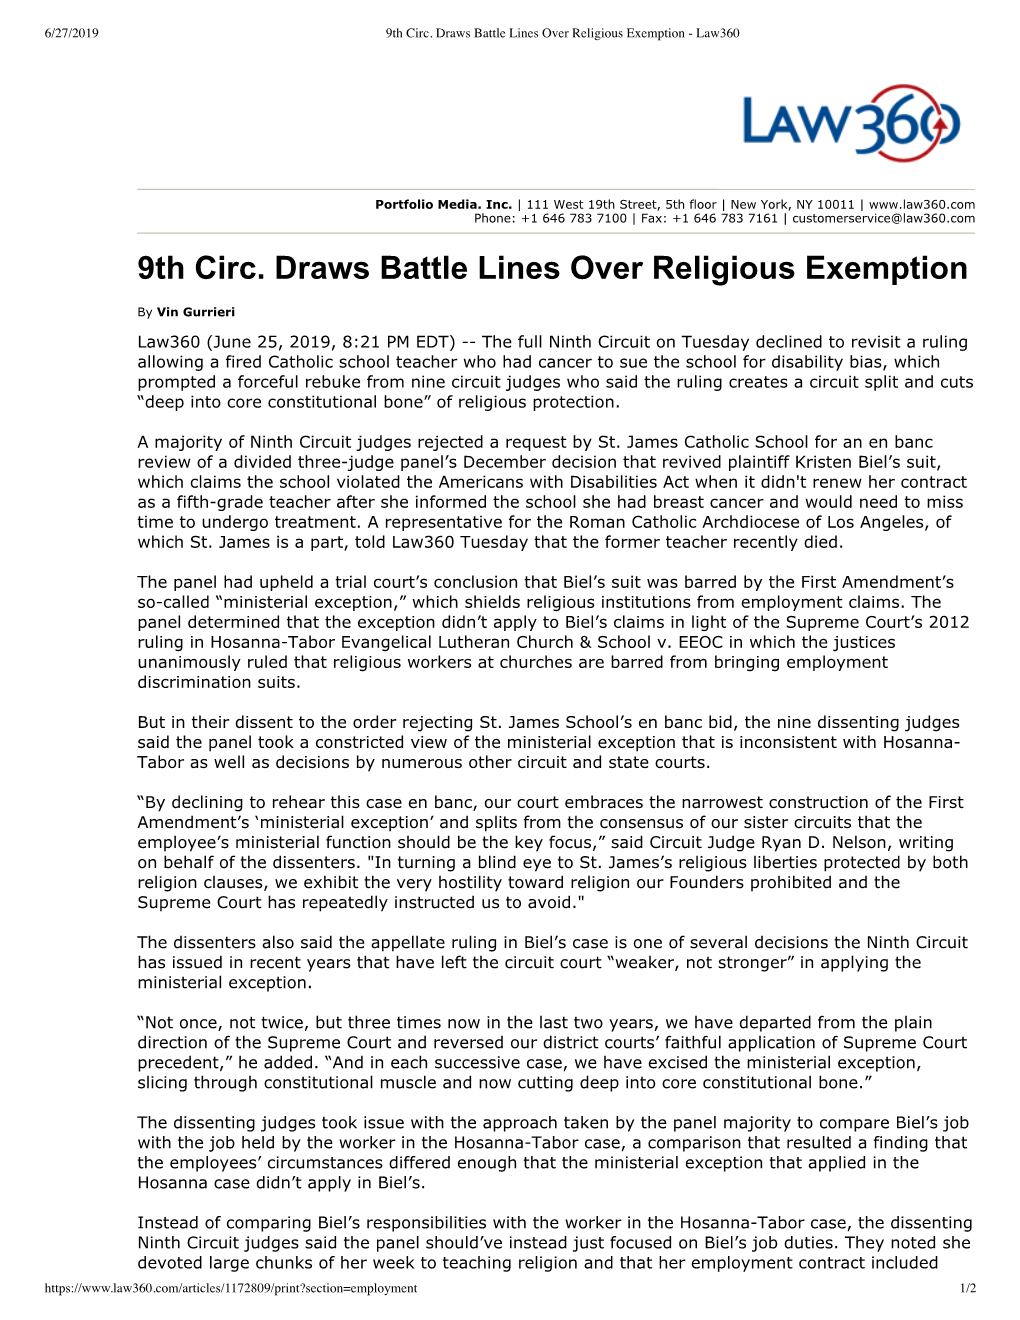 9Th Circ. Draws Battle Lines Over Religious Exemption - Law360